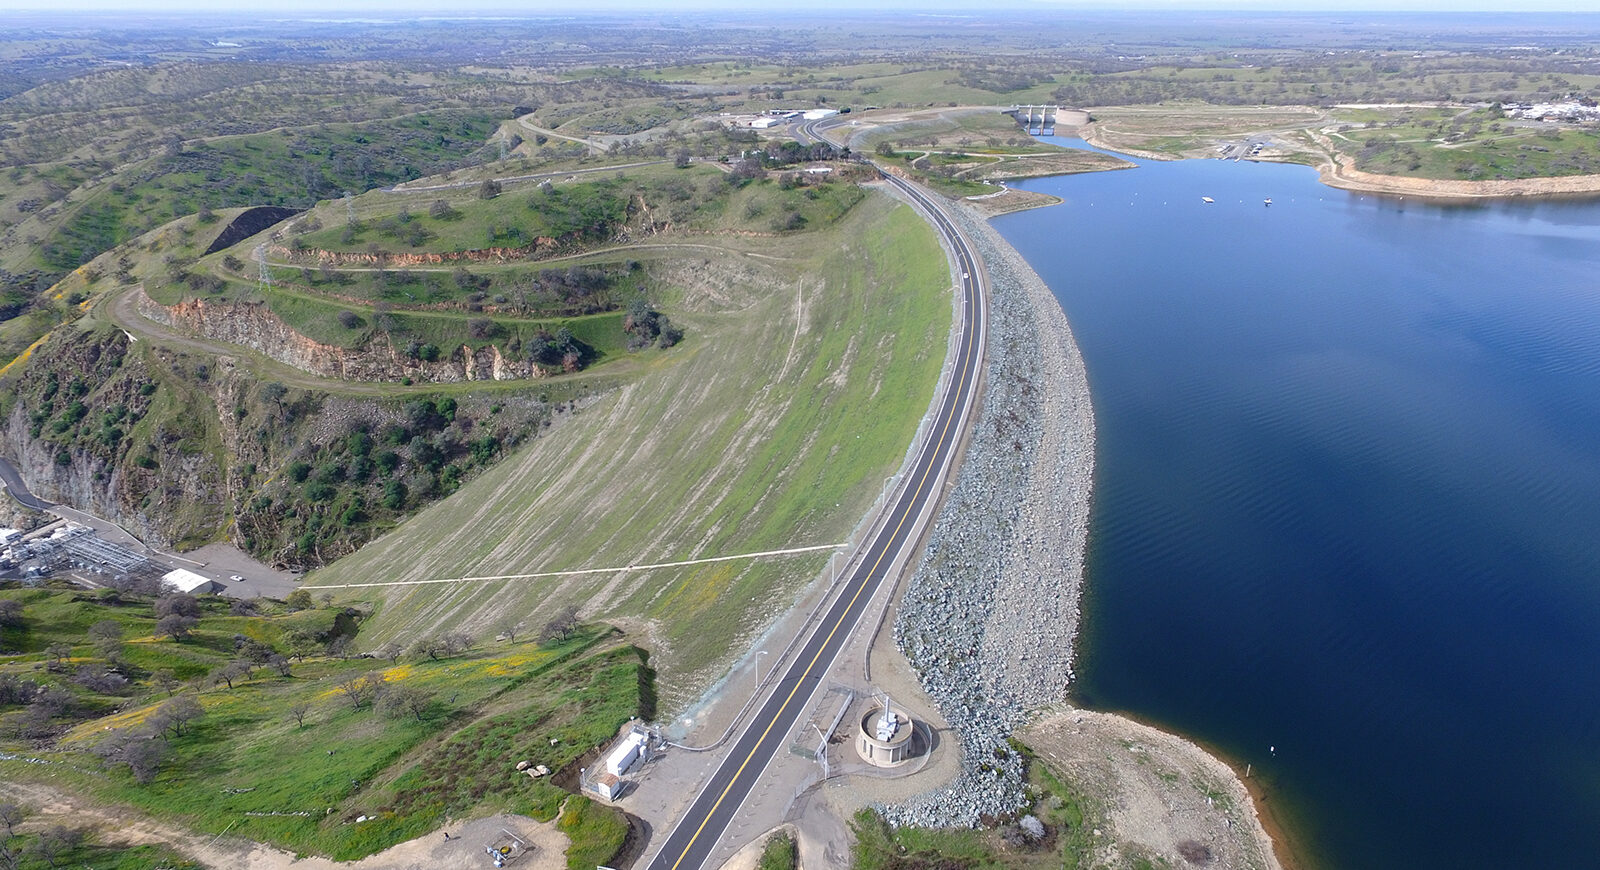 Aerial view of the road along the top of Don Pedro dam